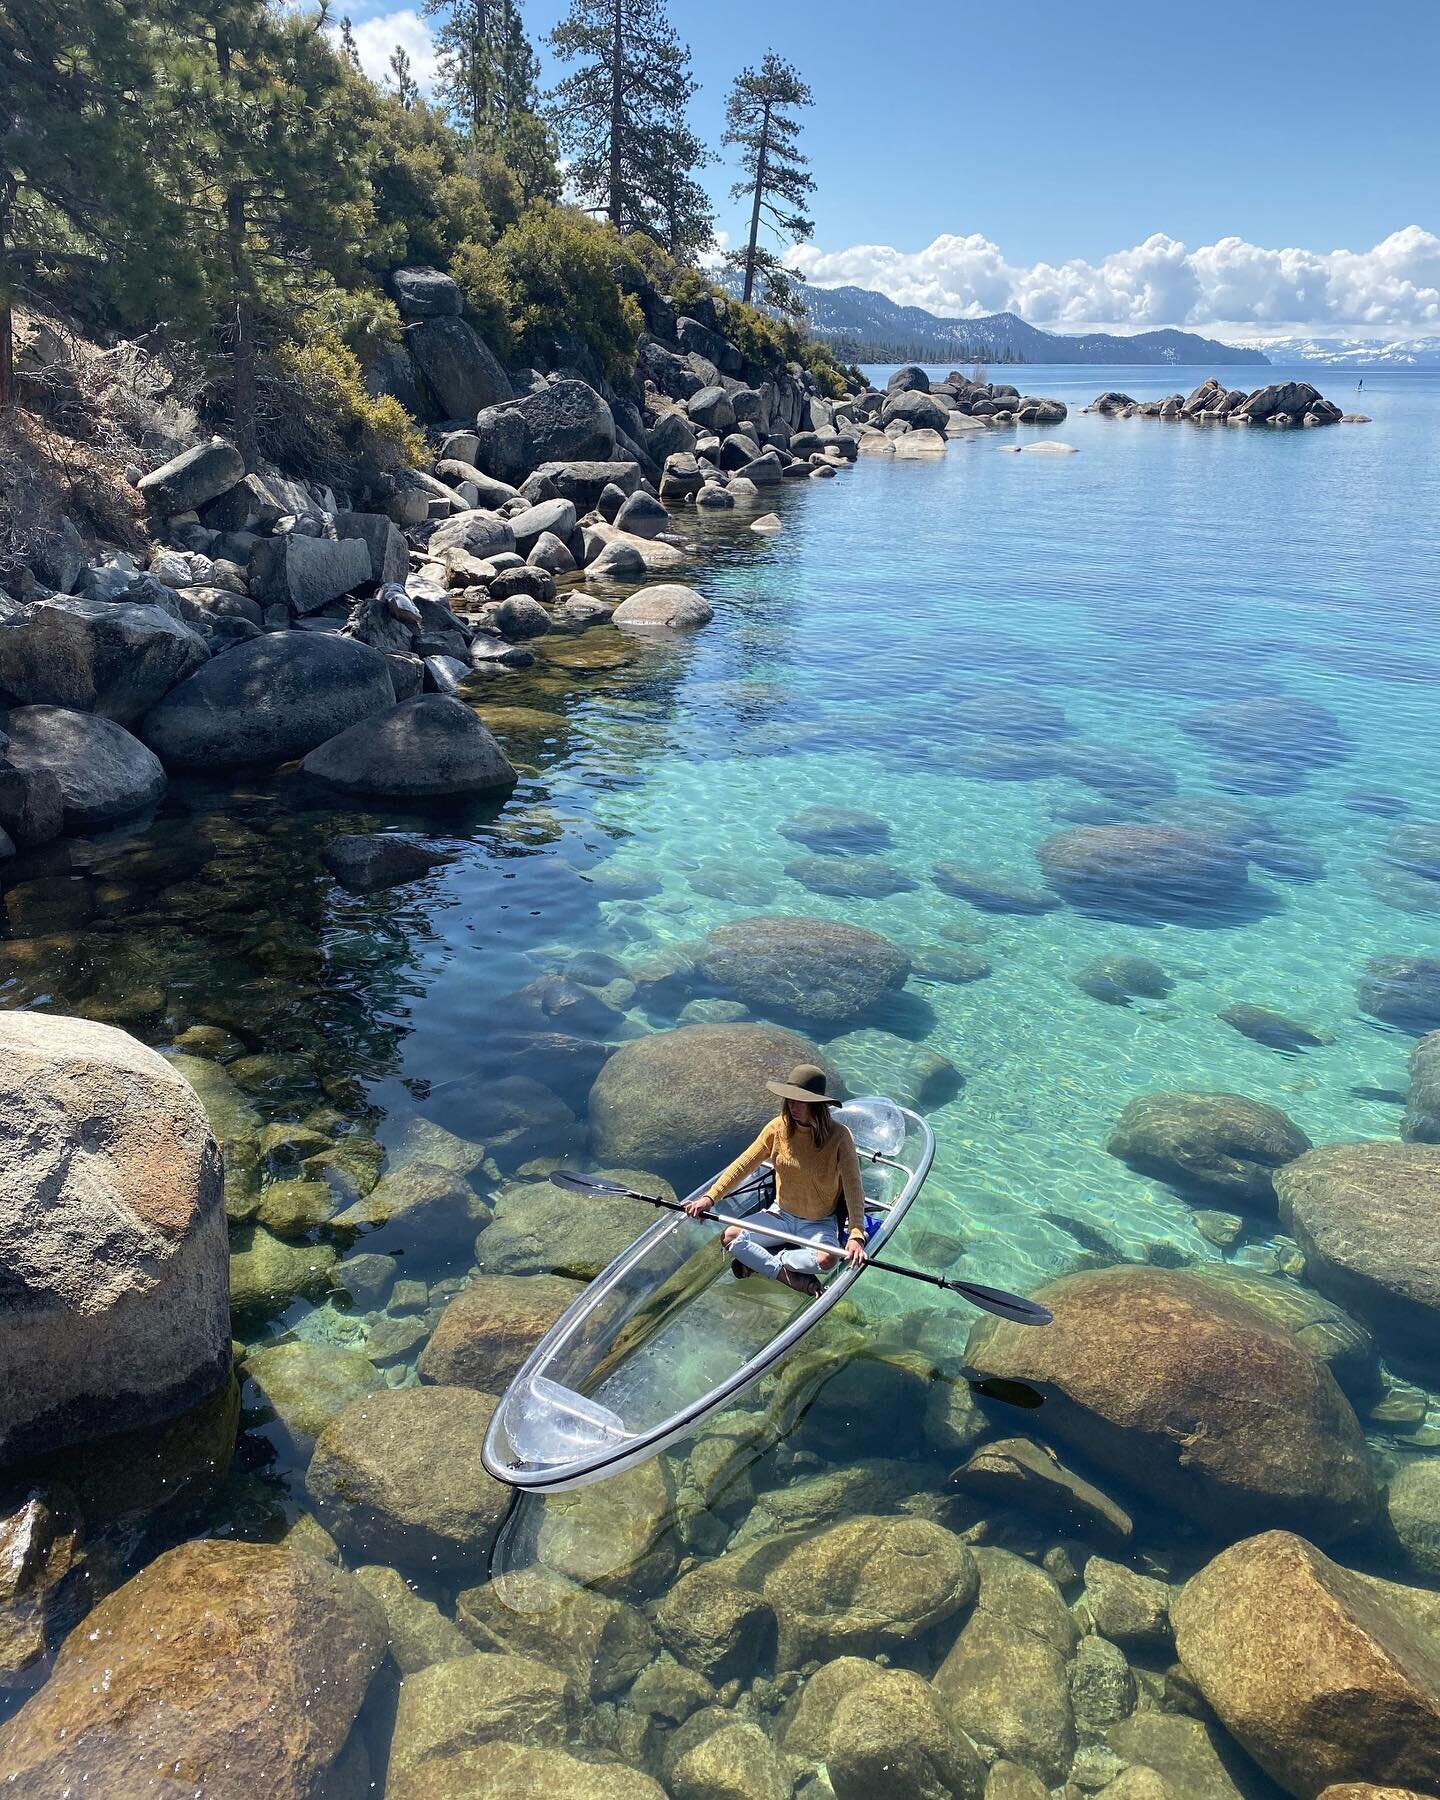 Now that ski season is complete, what are your plans for the summer months?

We suggest adding a @clearlytahoe excursion to the top of your bucket list &mdash; whether you choose to self guide your way around the shoreline, or enjoy one of their guid